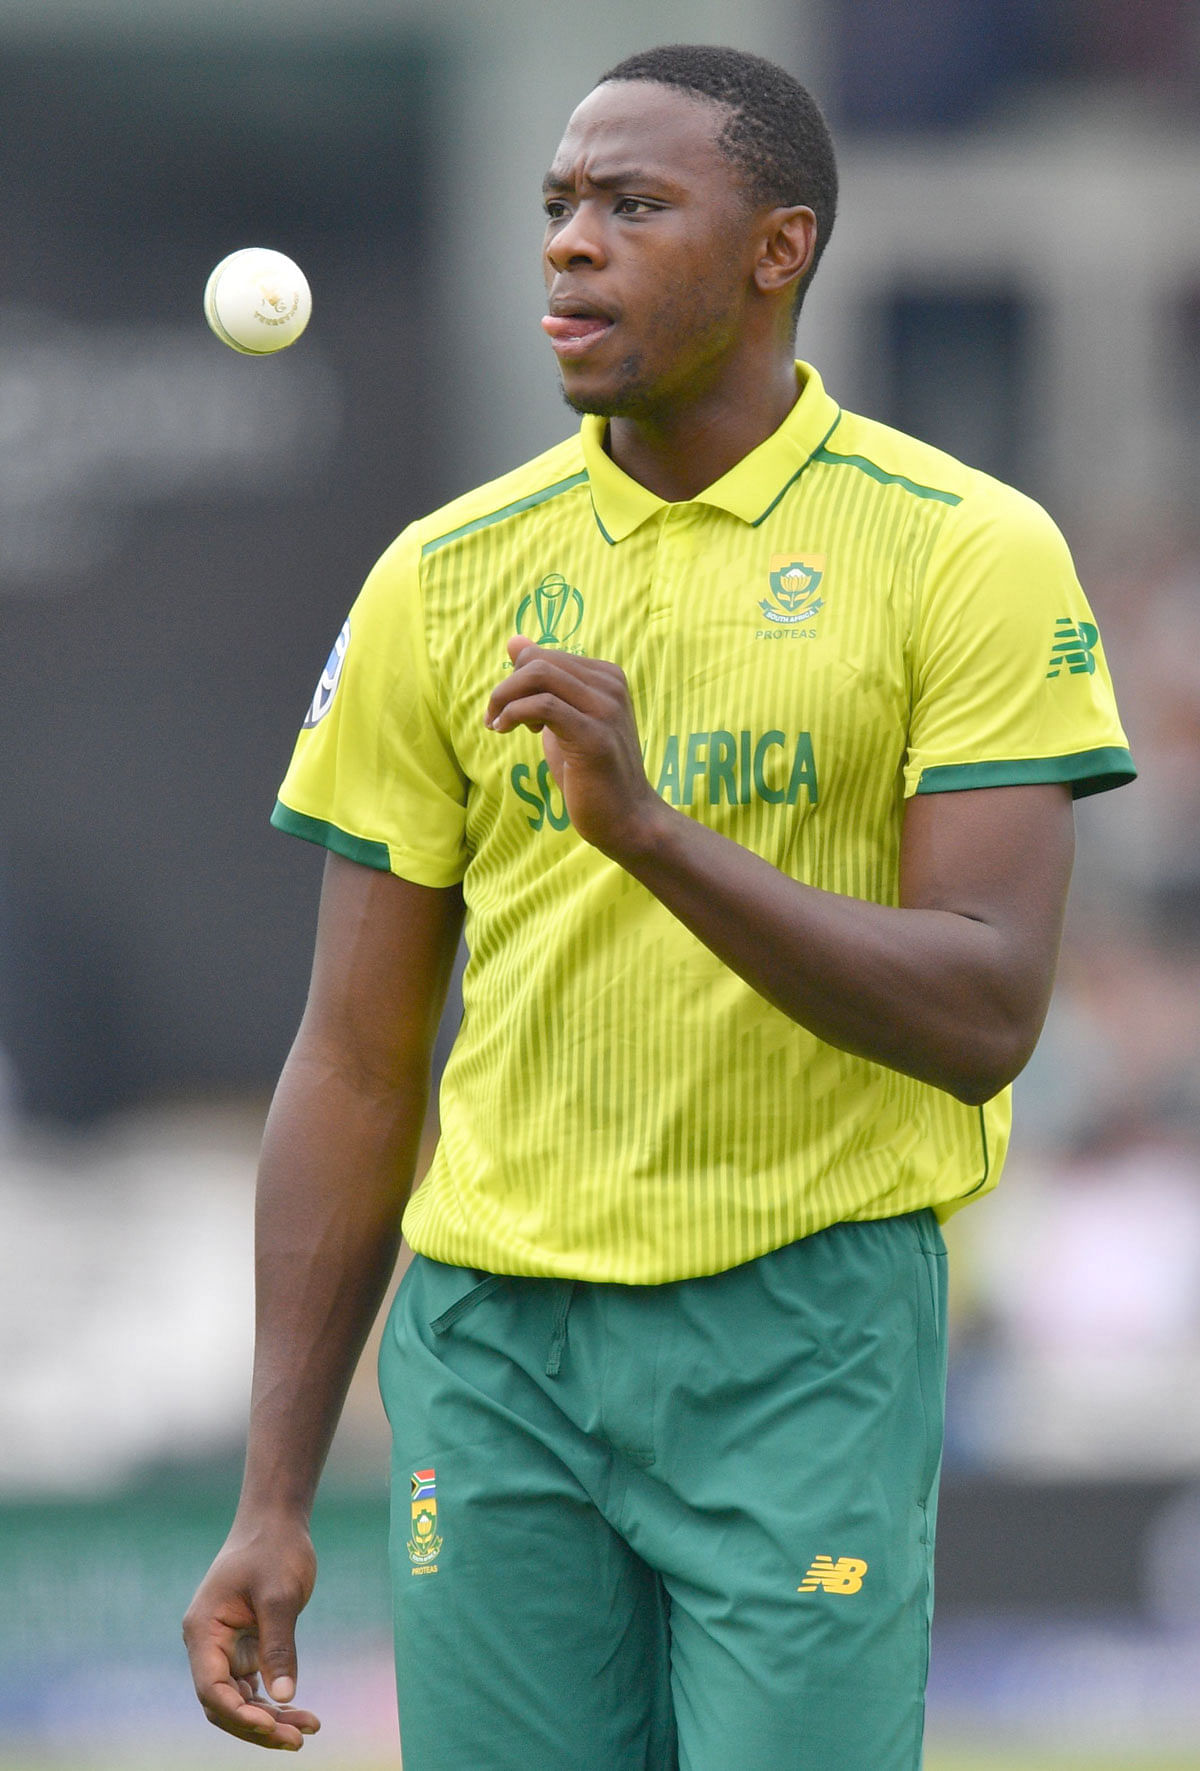 South Africa`s Kagiso Rabada prepares to bowl during the 2019 Cricket World Cup group stage match between Pakistan and South Africa at Lord`s Cricket Ground in London on 23 June, 2019. Photo: AFP